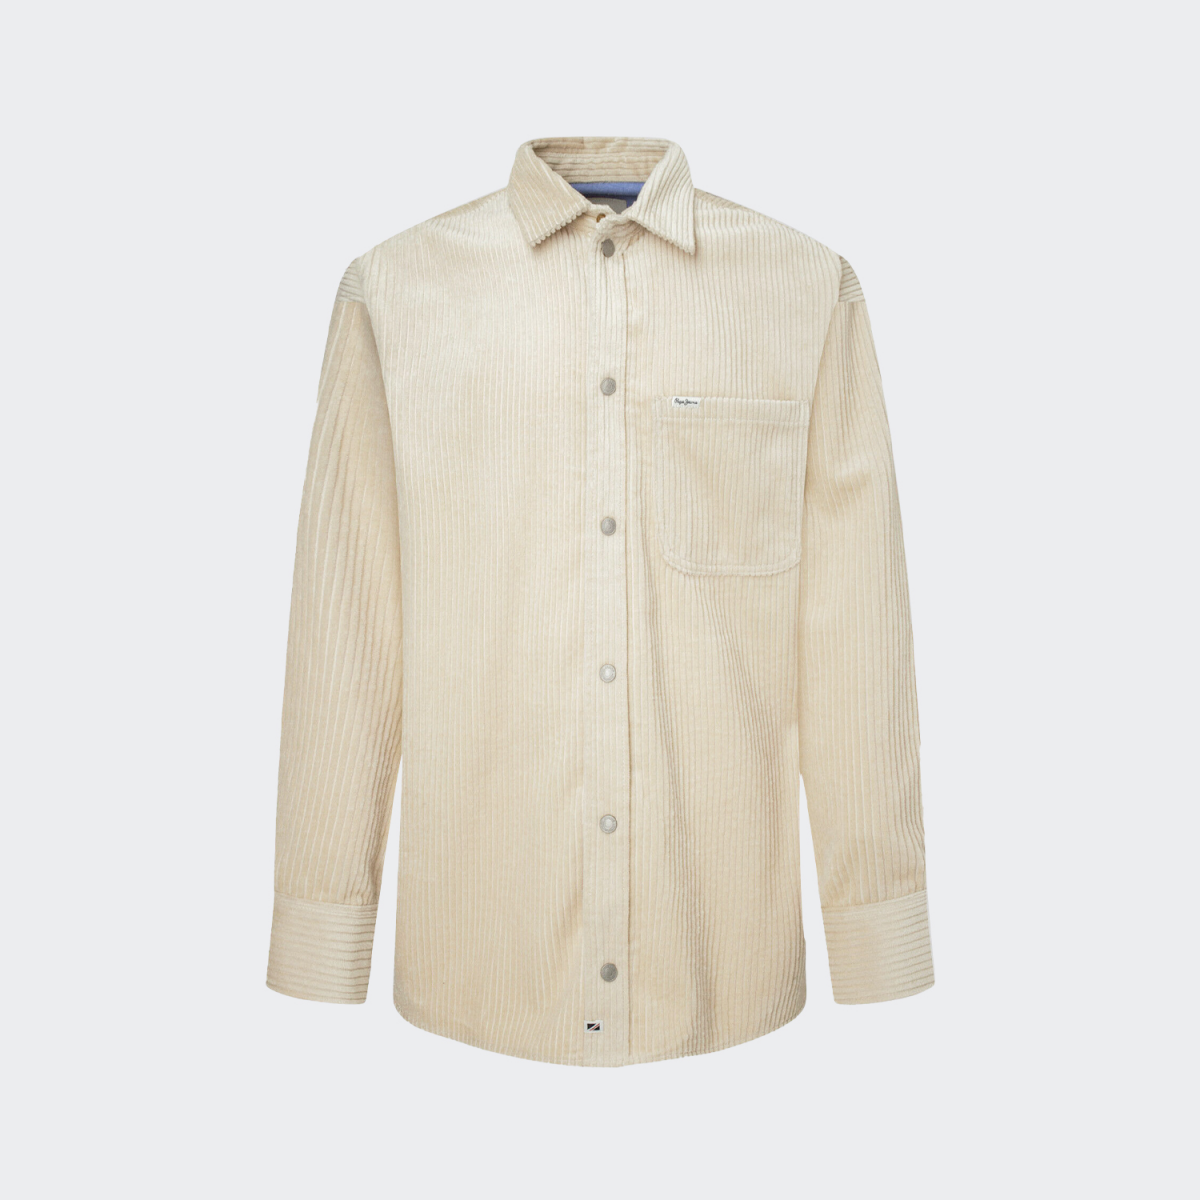 Pepe Jeans Beige Shirt - PM308175847_1 | Urban Project